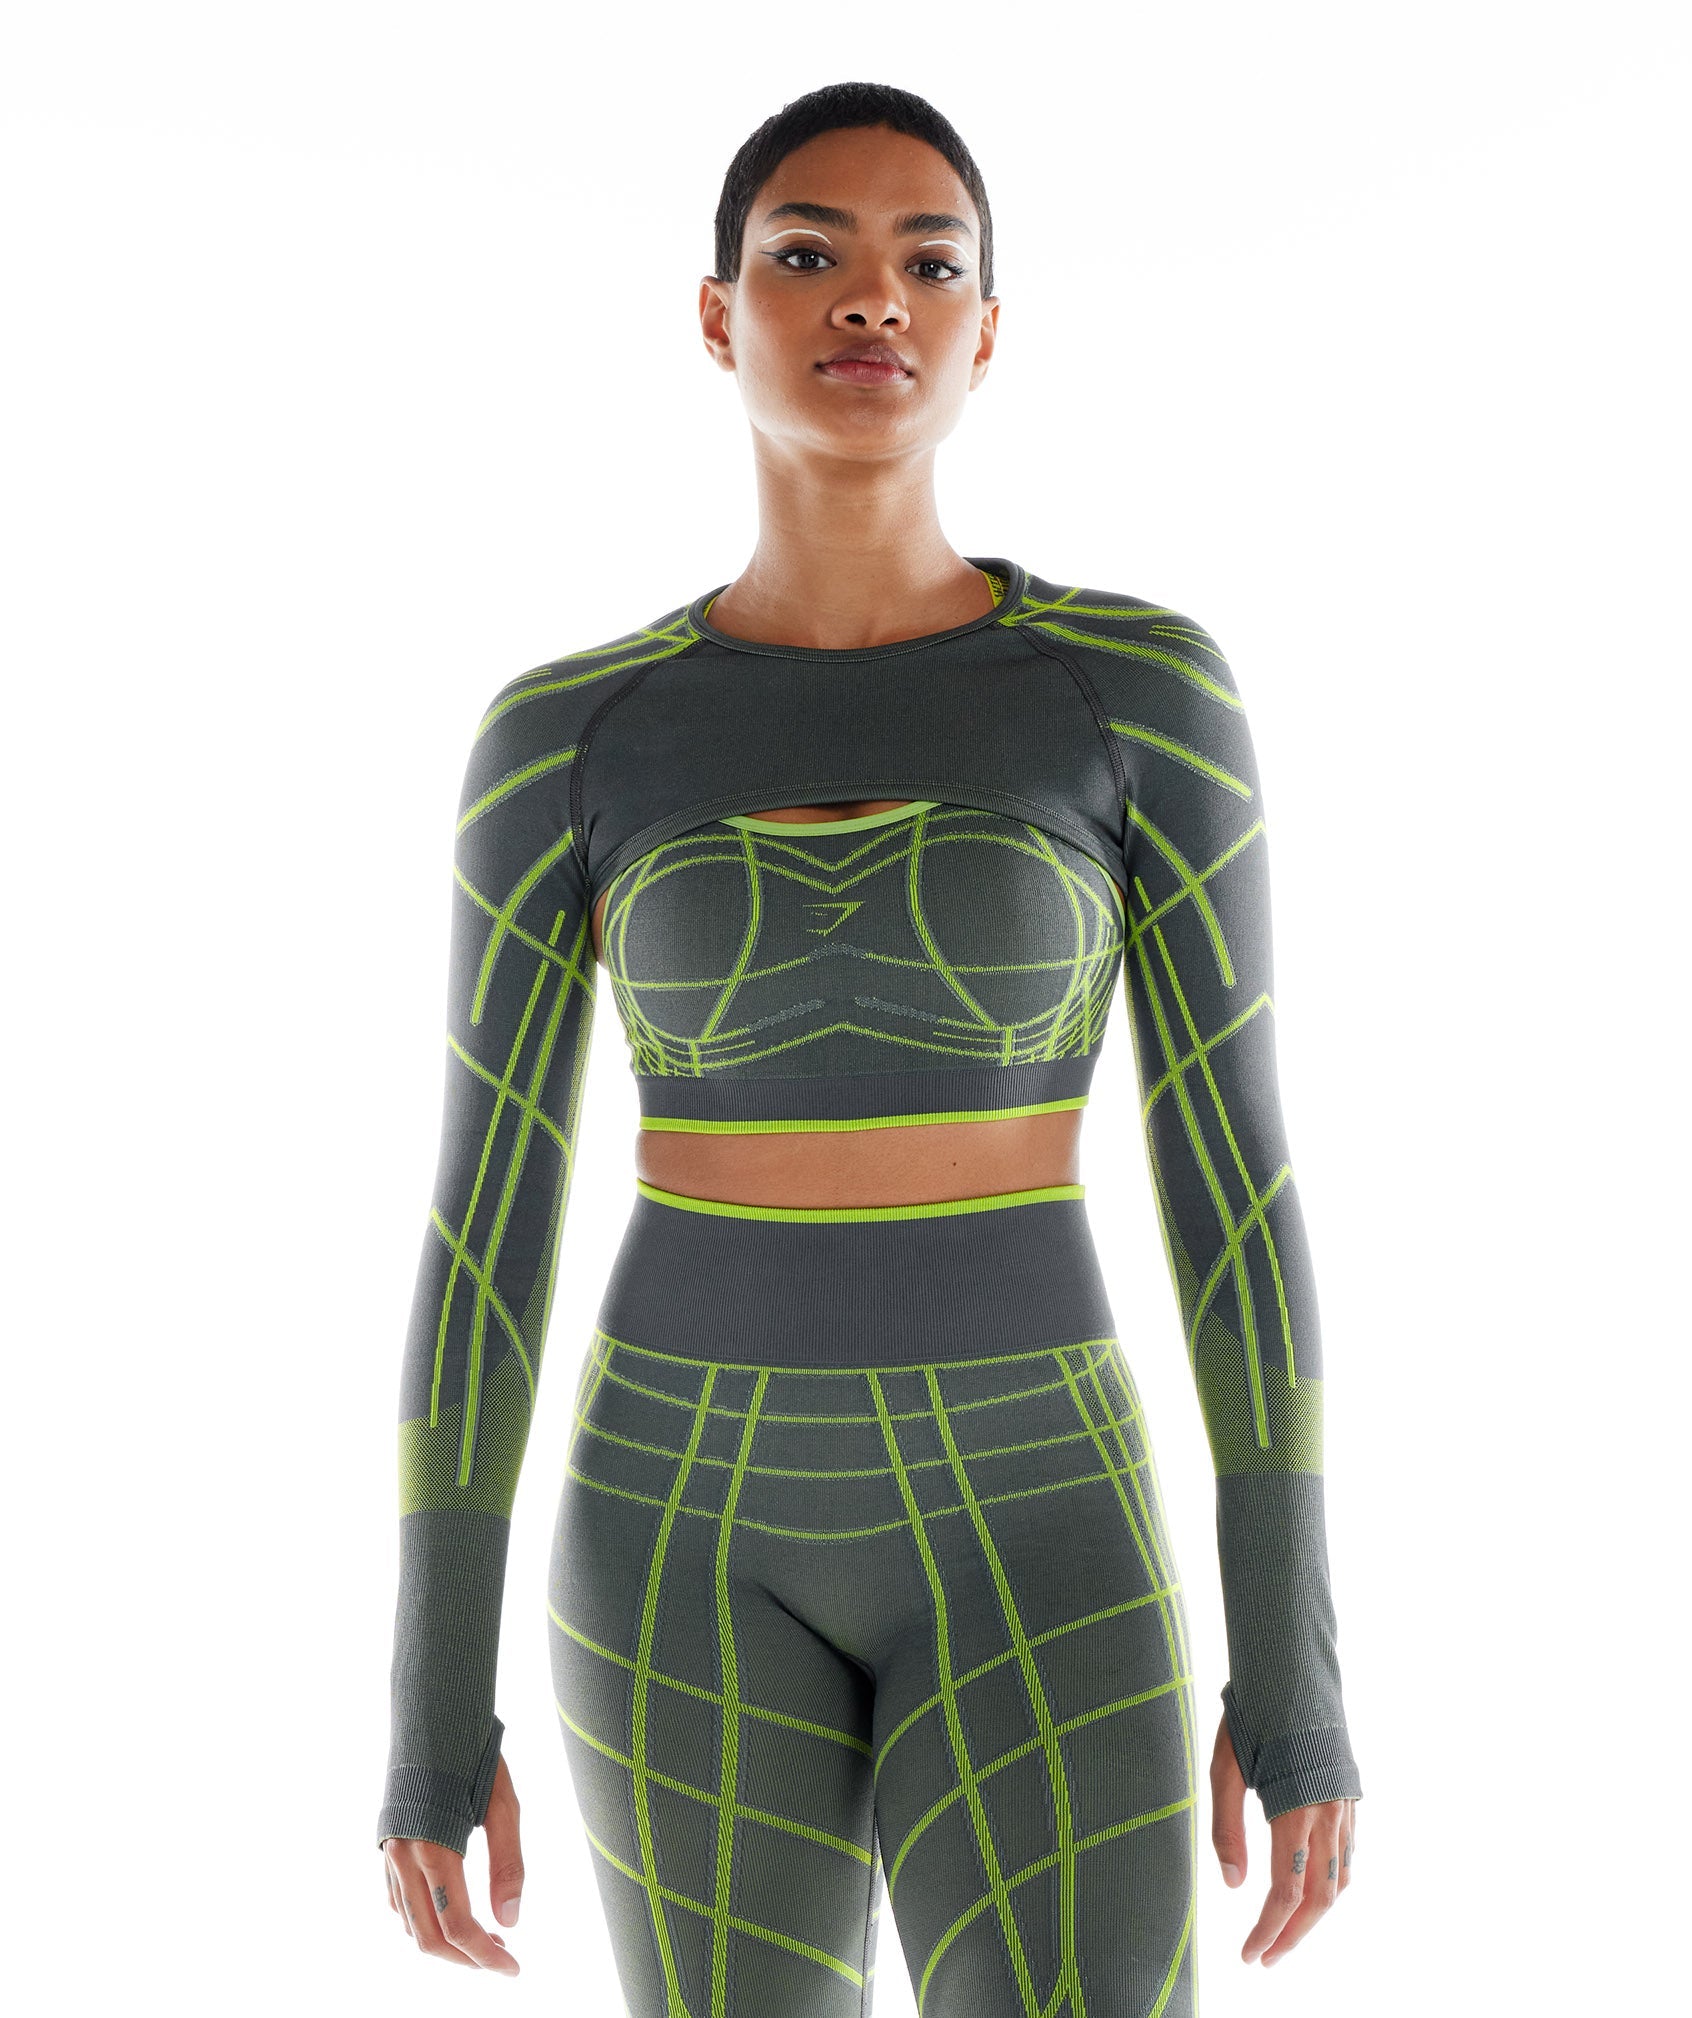 Wtflex Linear Seamless Long Sleeve Shrug in  Charcoal Grey/Fluo Green/Light Grey - view 1